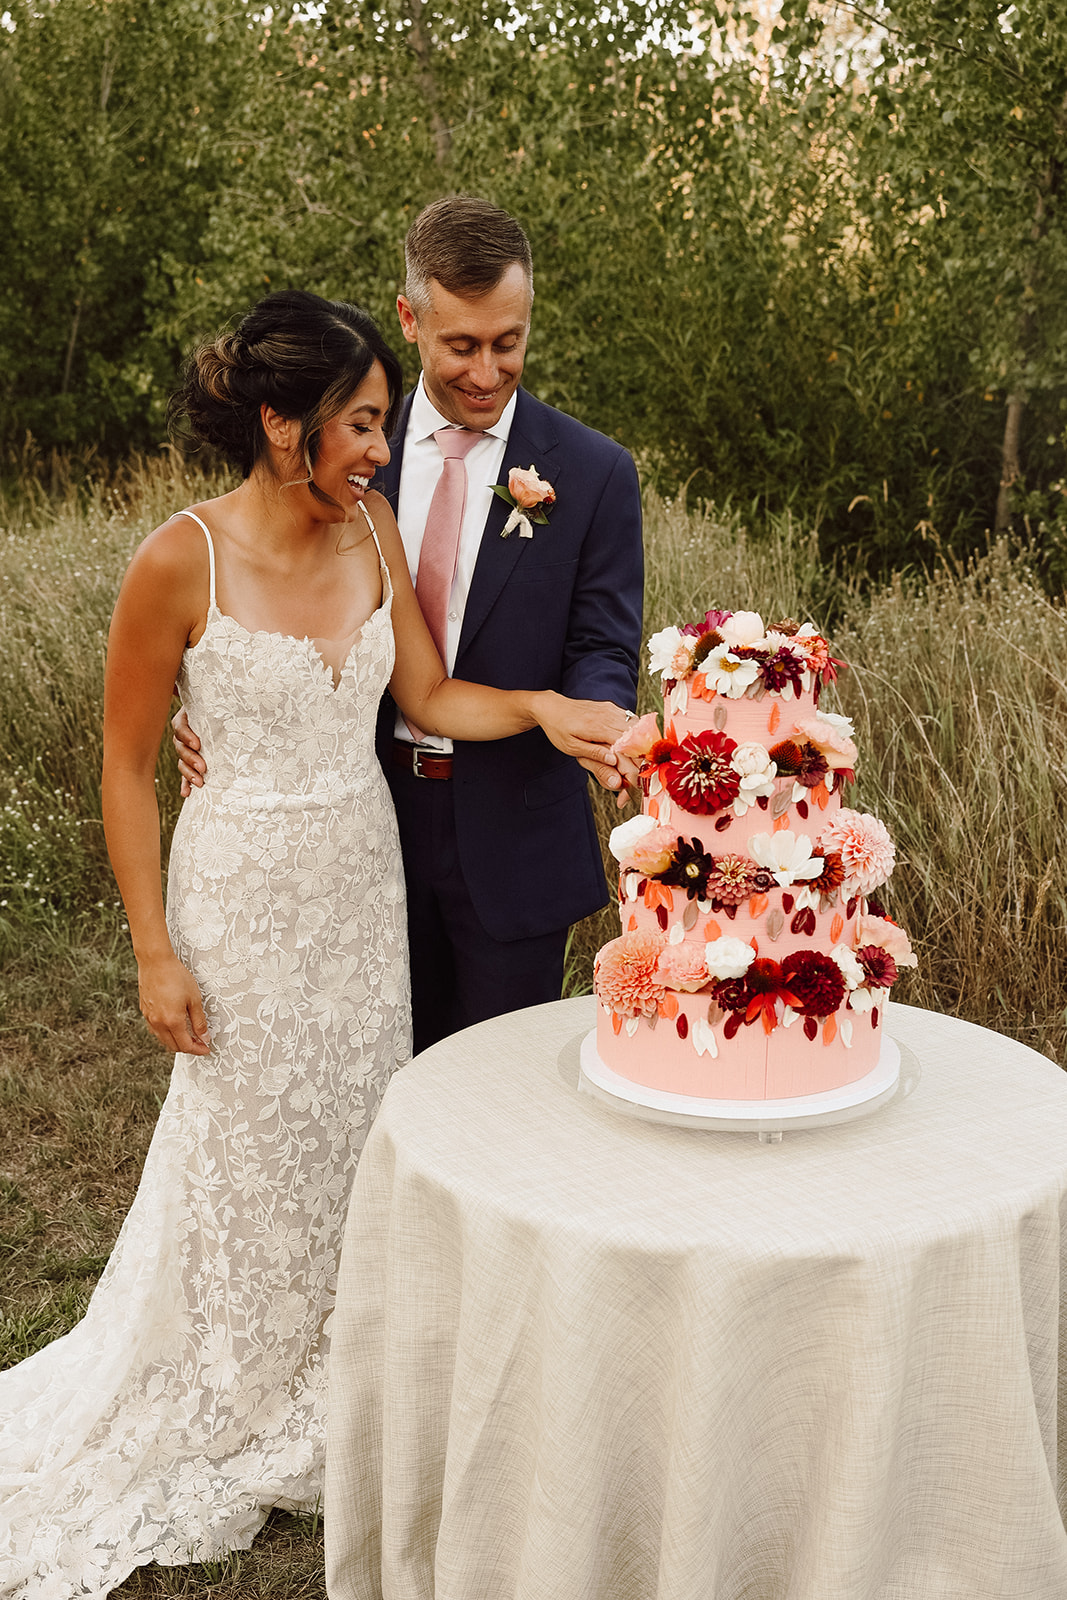 Bride and groom cutting their pink cake 